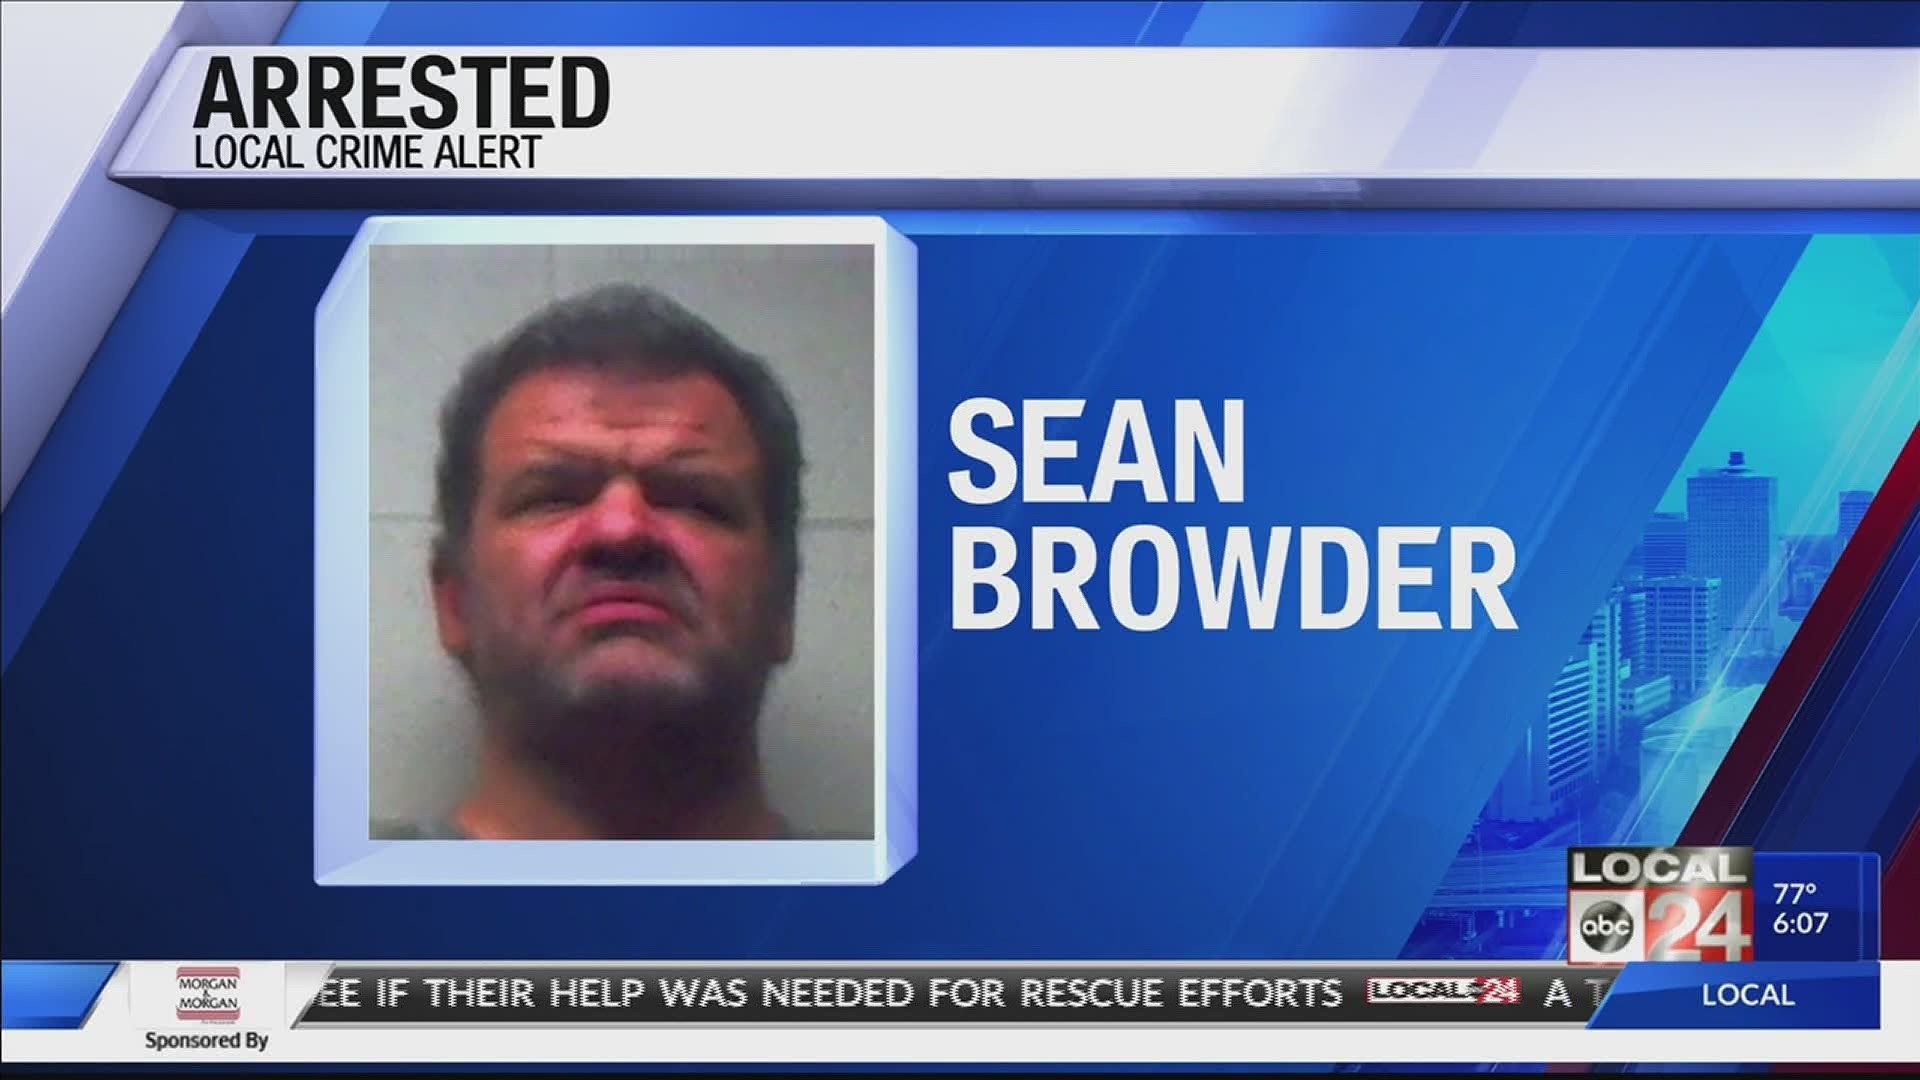 The child is okay, and now Sean Browder faces several charges.